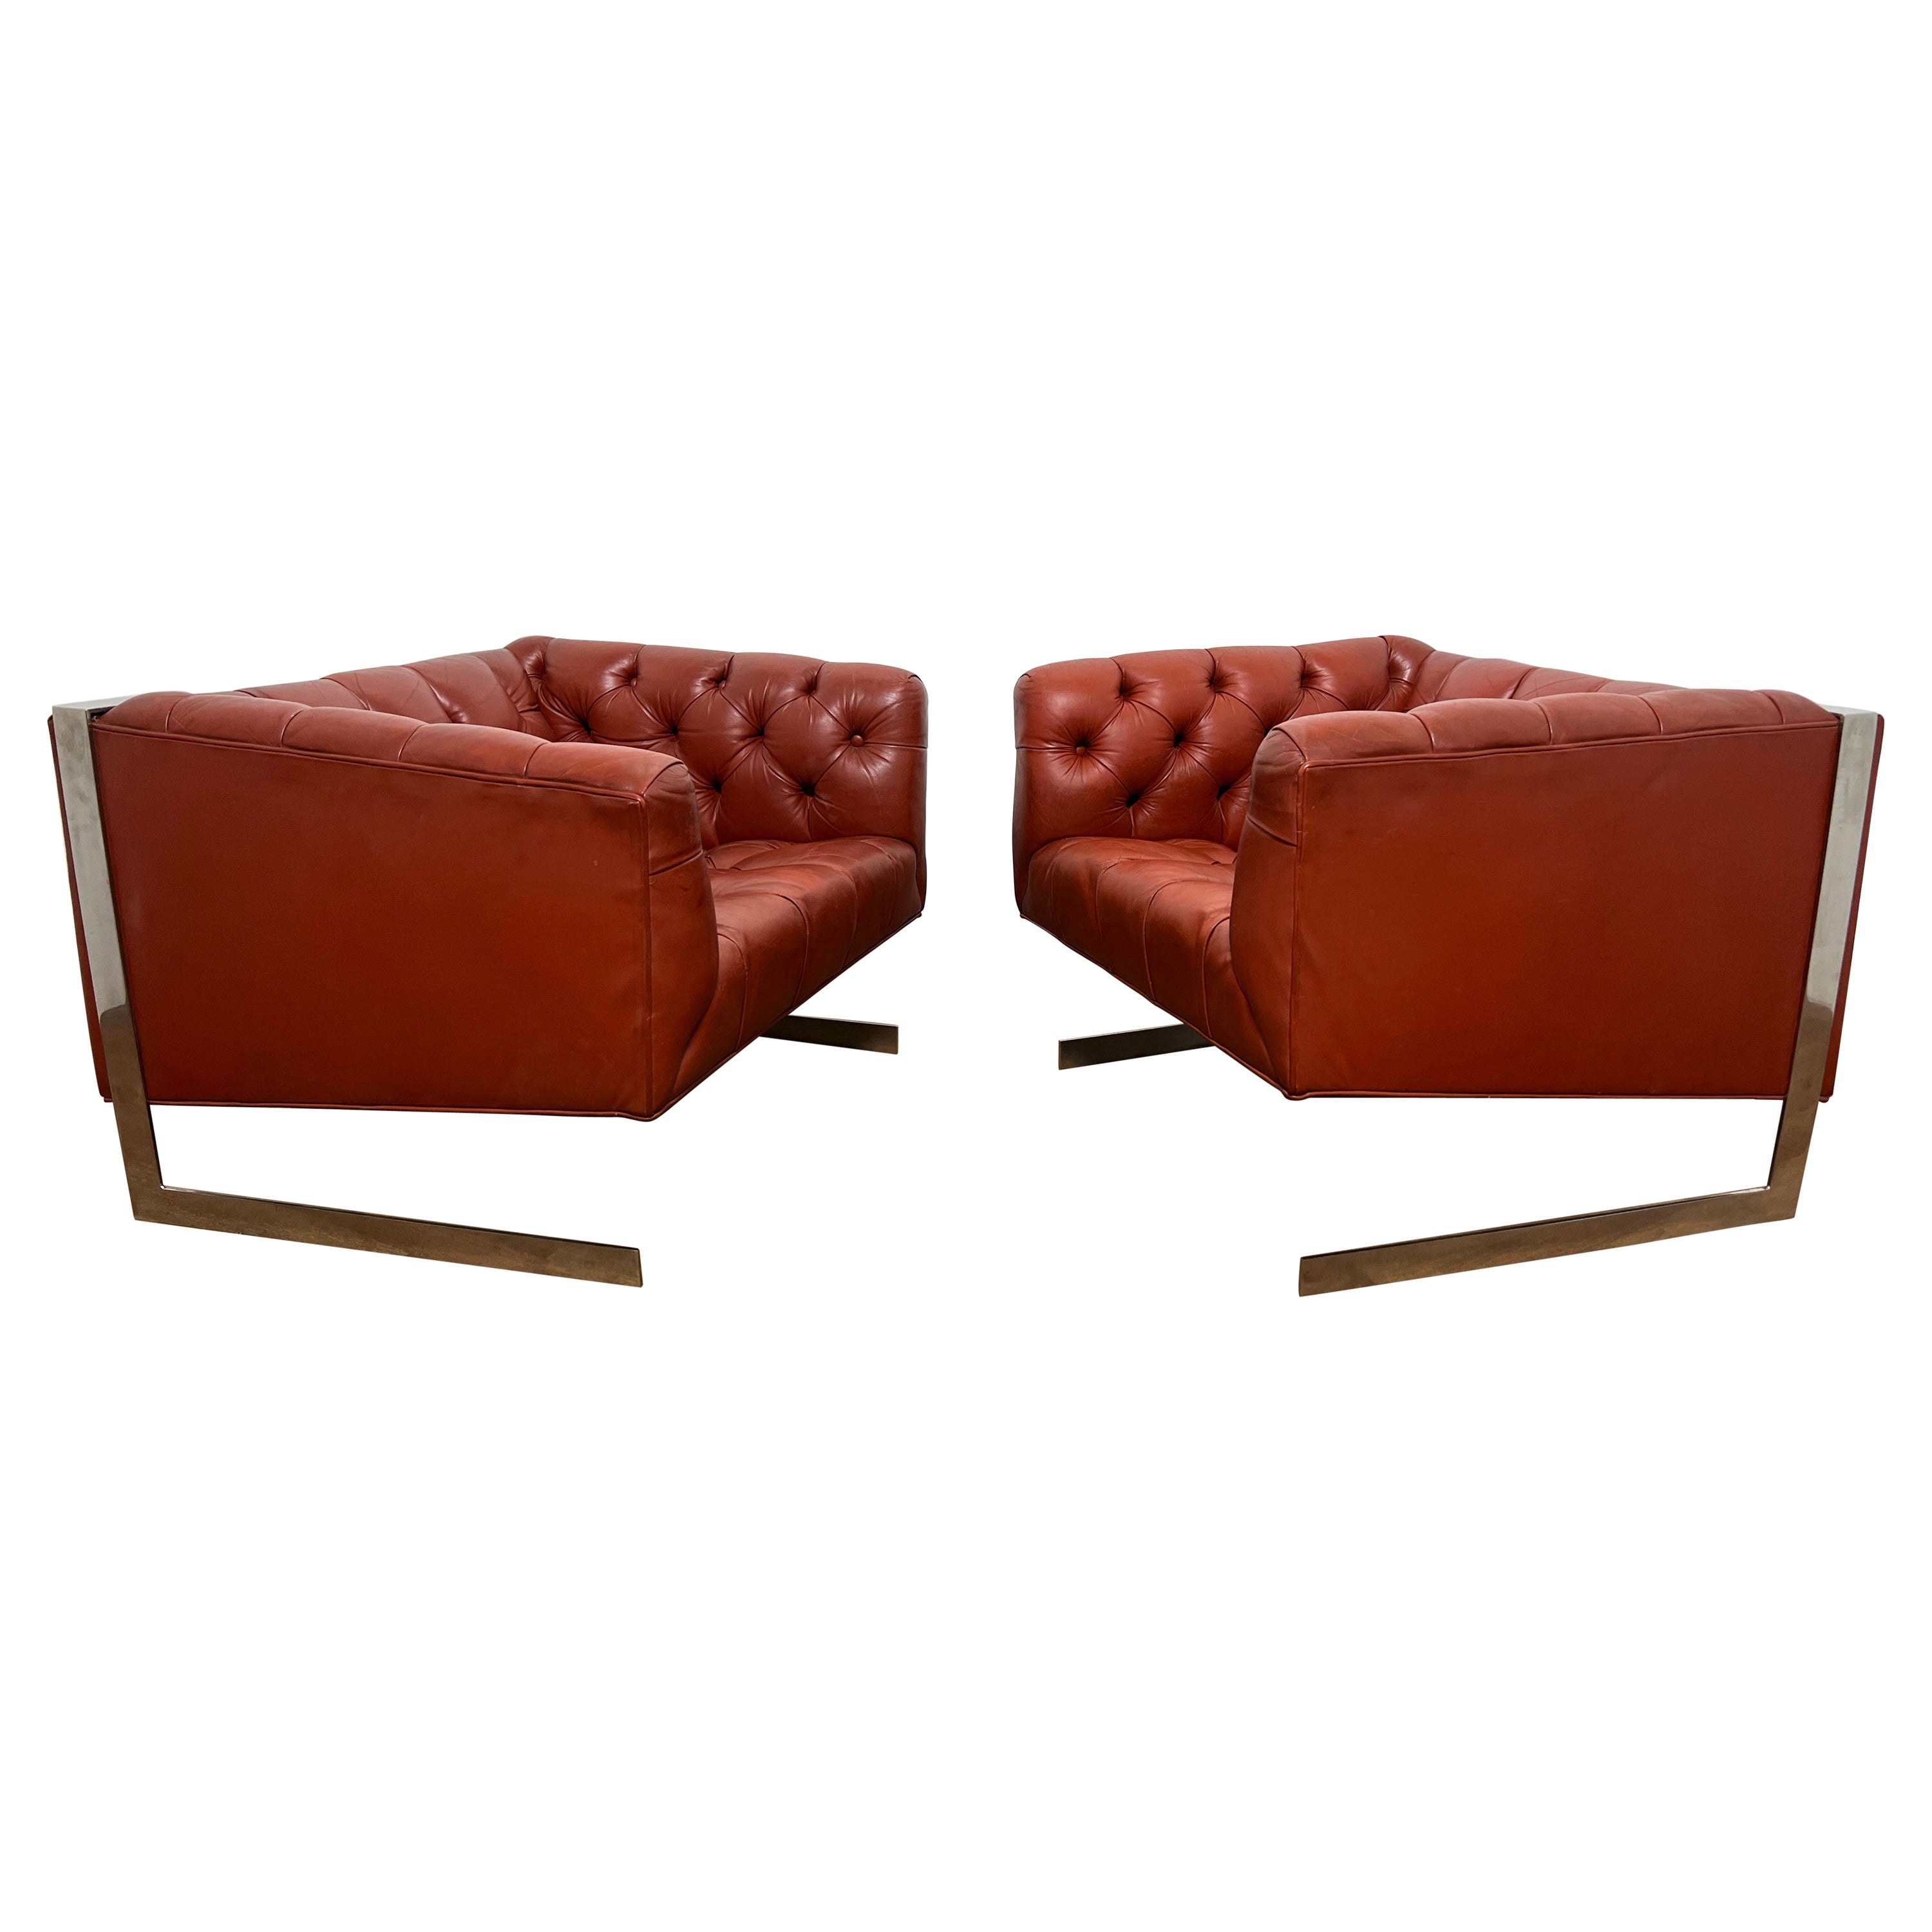 Pair of Milo Baughman Style Leather and Chrome Cantilever Lounge Chairs c. 1970s For Sale